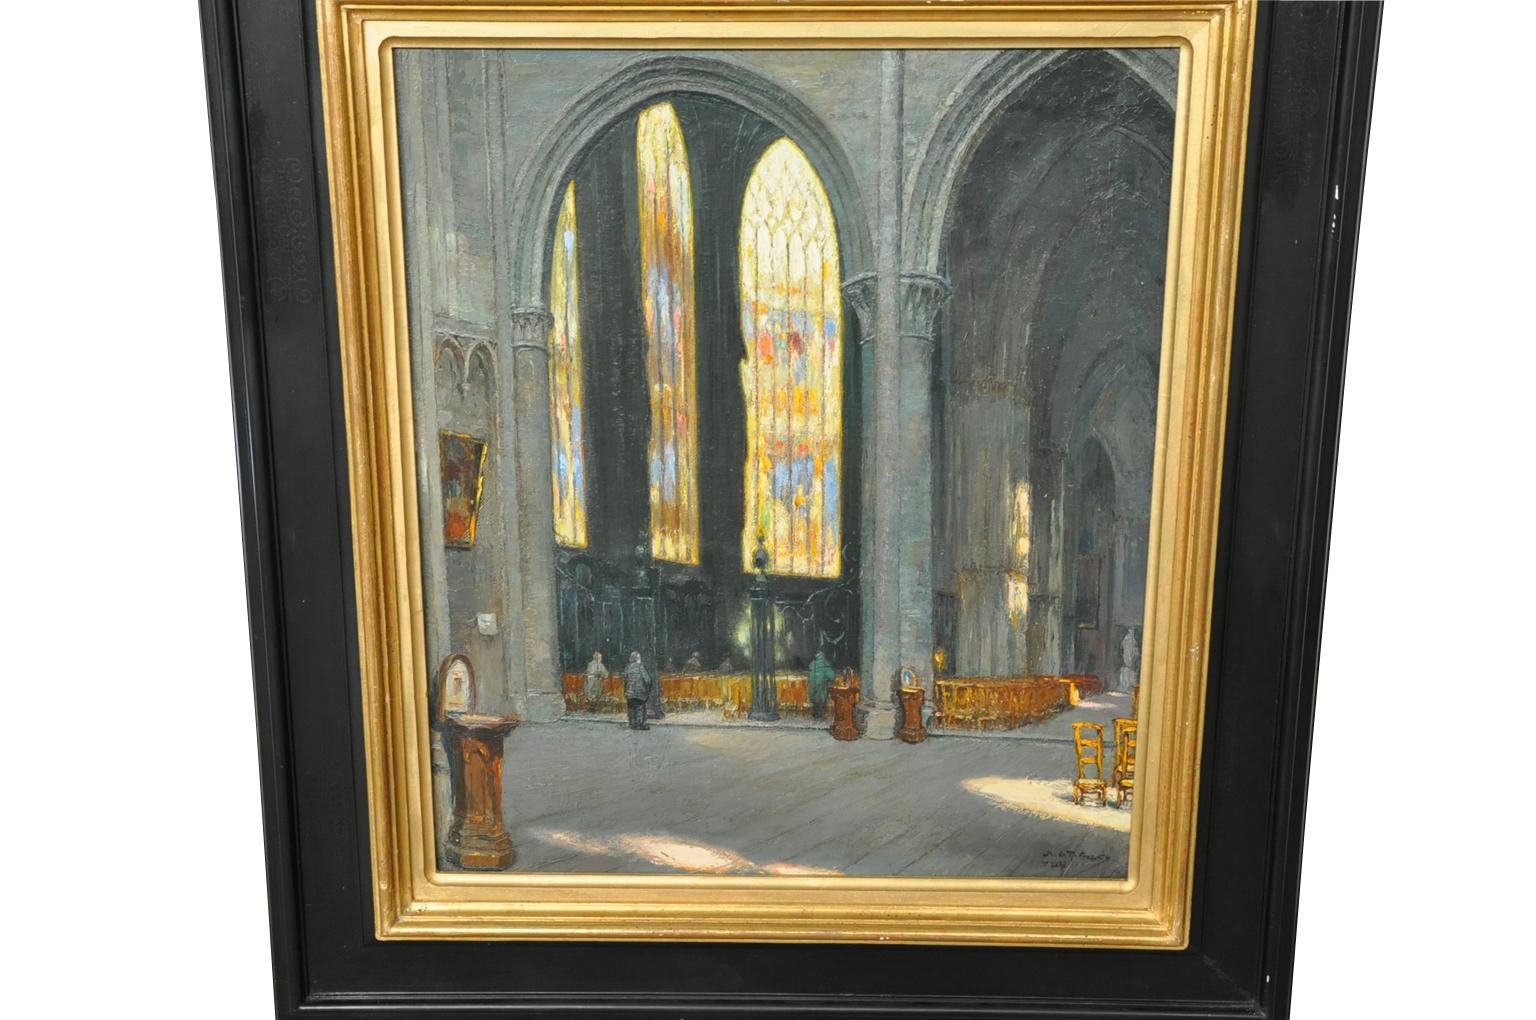 A very wonderful early 20th century oil on canvas painting by Polish born artist Mecislas Rakowsky (born 1887 - died 1947). The painting represents the interior of the Cathedral of Saint Michel and Gudule of Brussels.